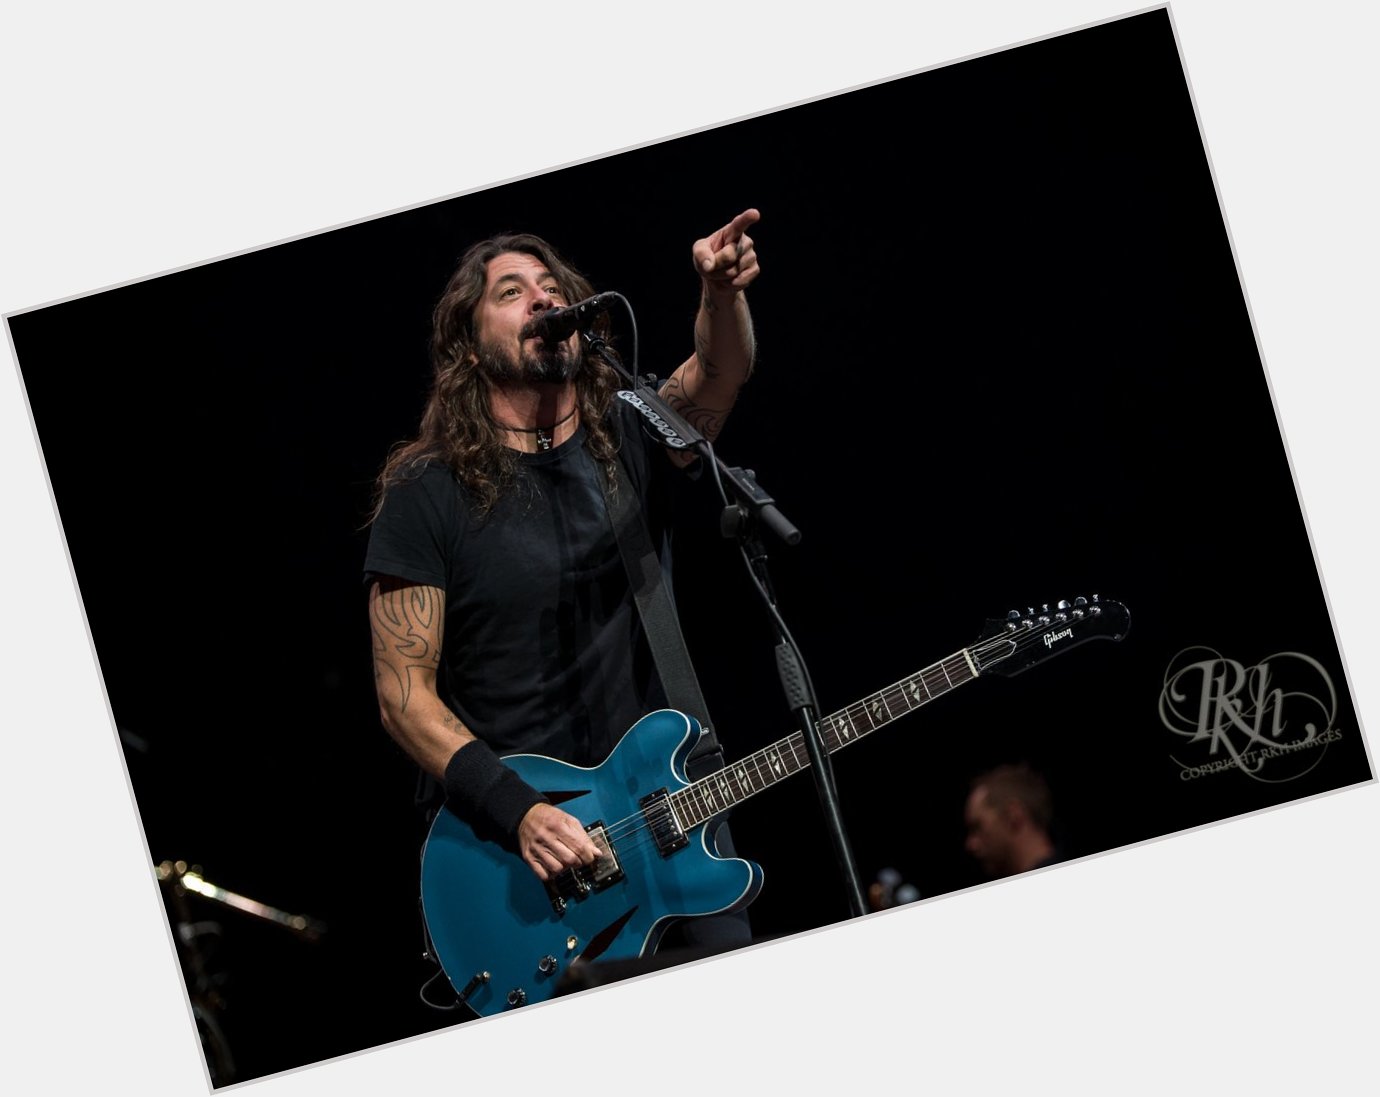 Happy birthday, Dave Grohl!  